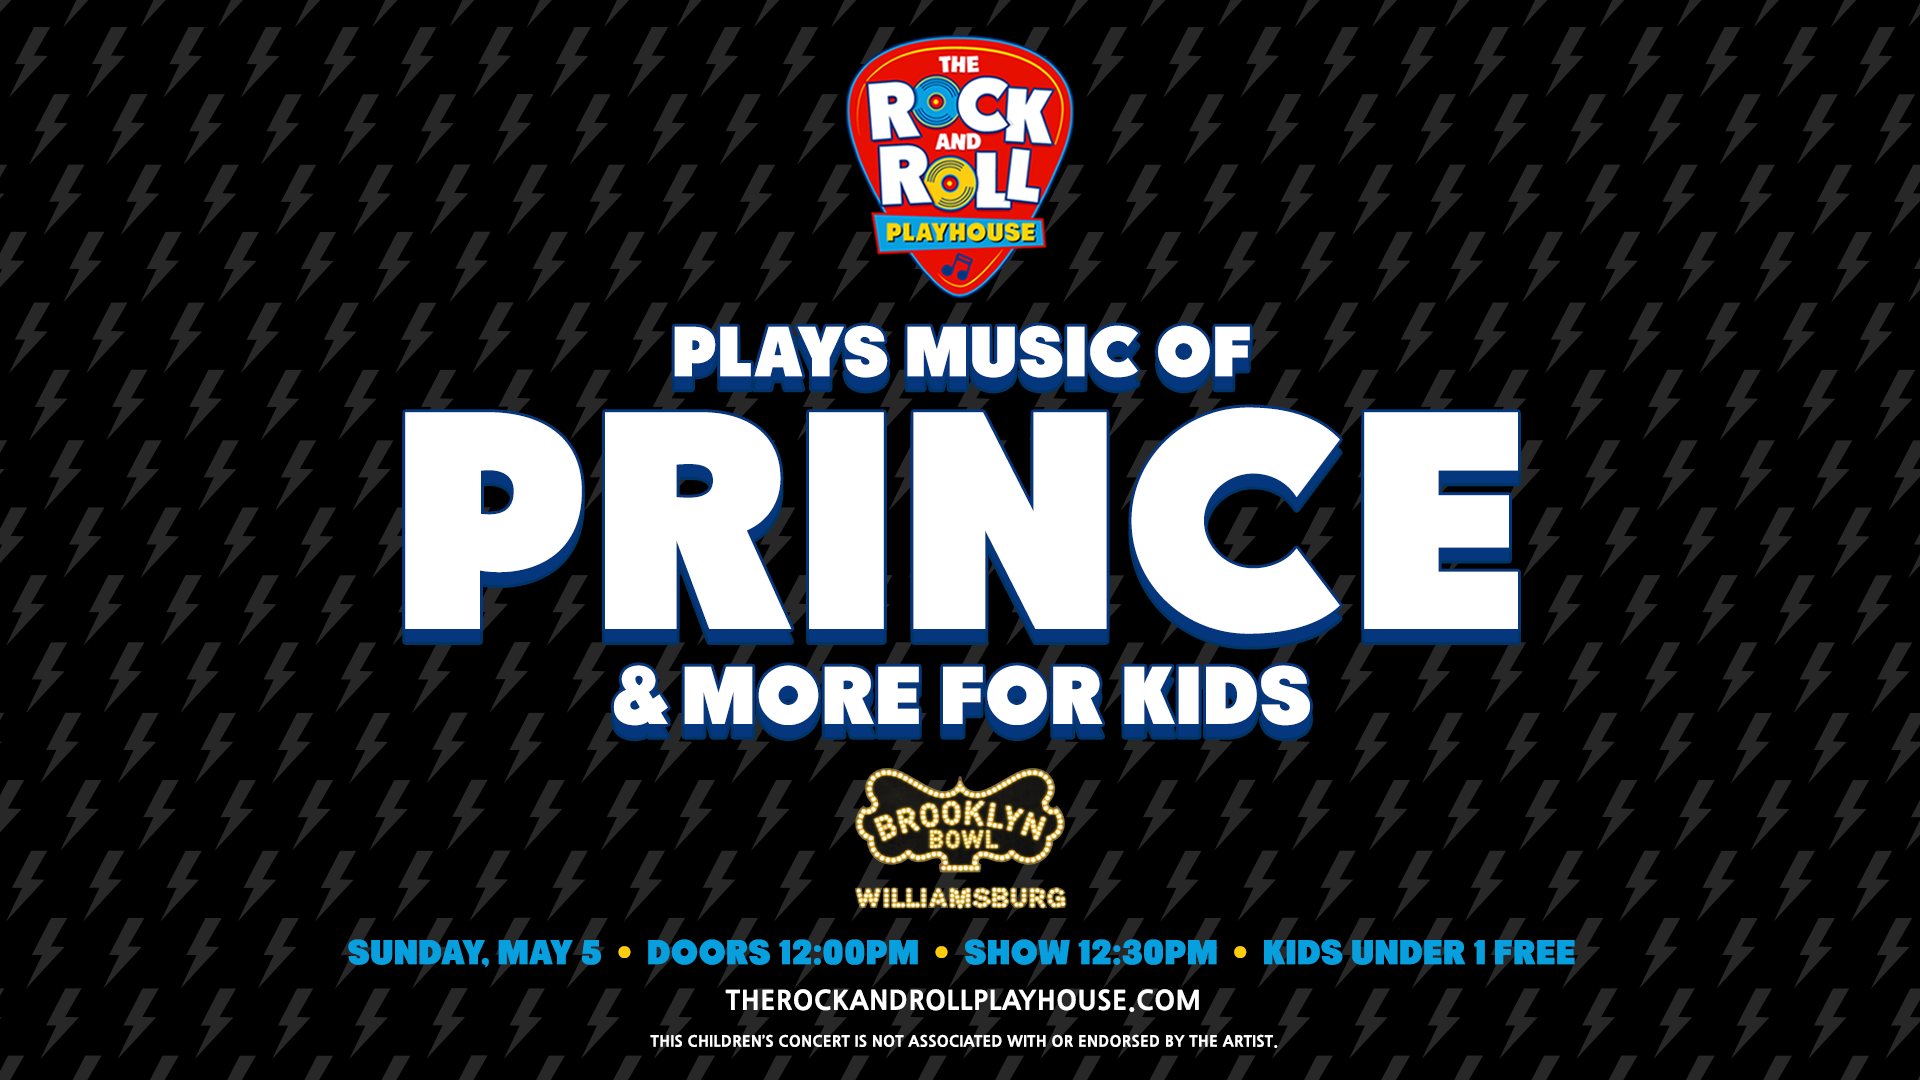 The Rock and Roll Playhouse plays the Music of  Prince + More for Kids